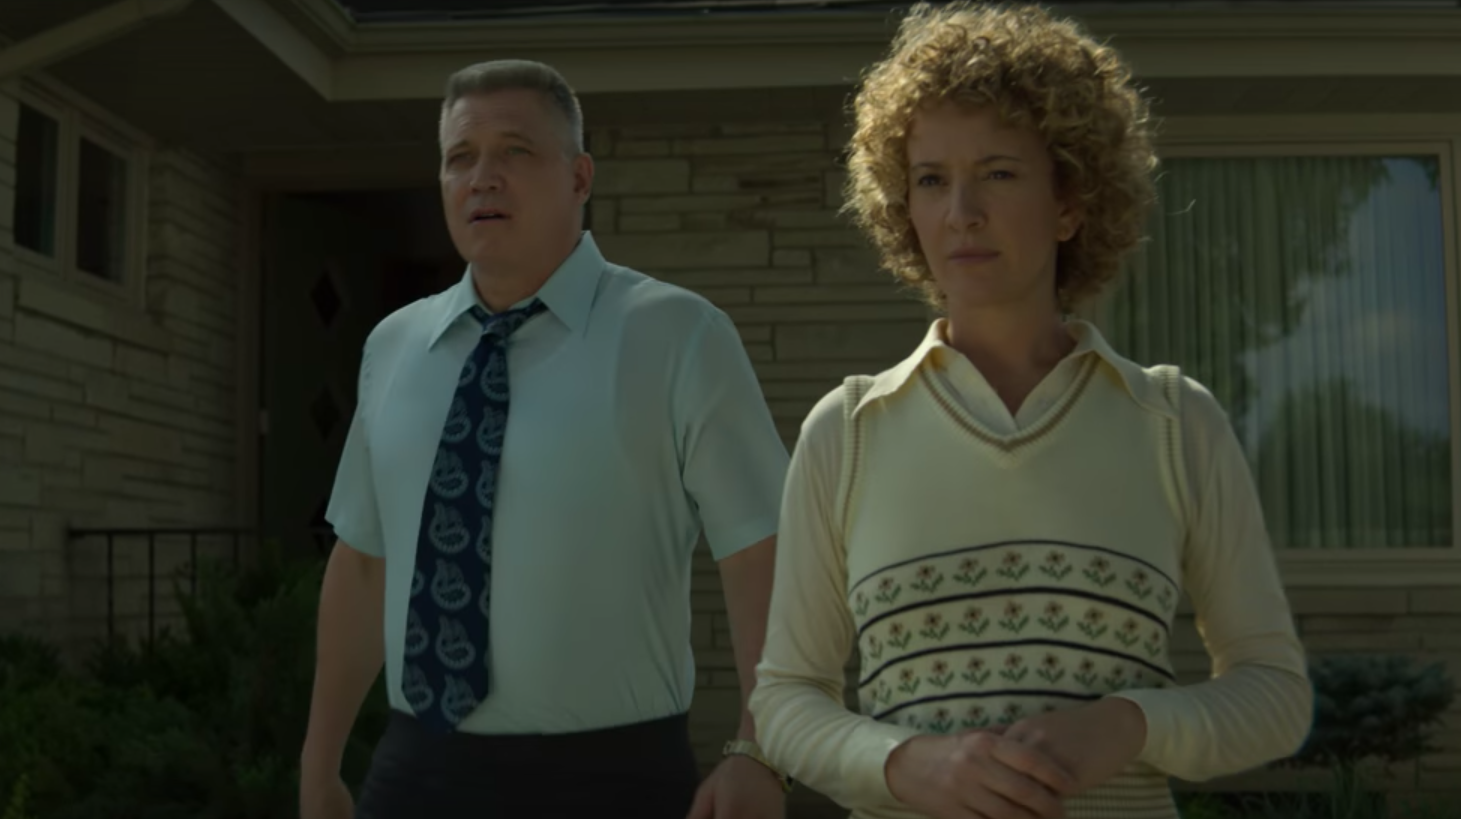 Mindhunter’s Bill Tench’s wife Nancy is played by the same actress as Rachel in The Office